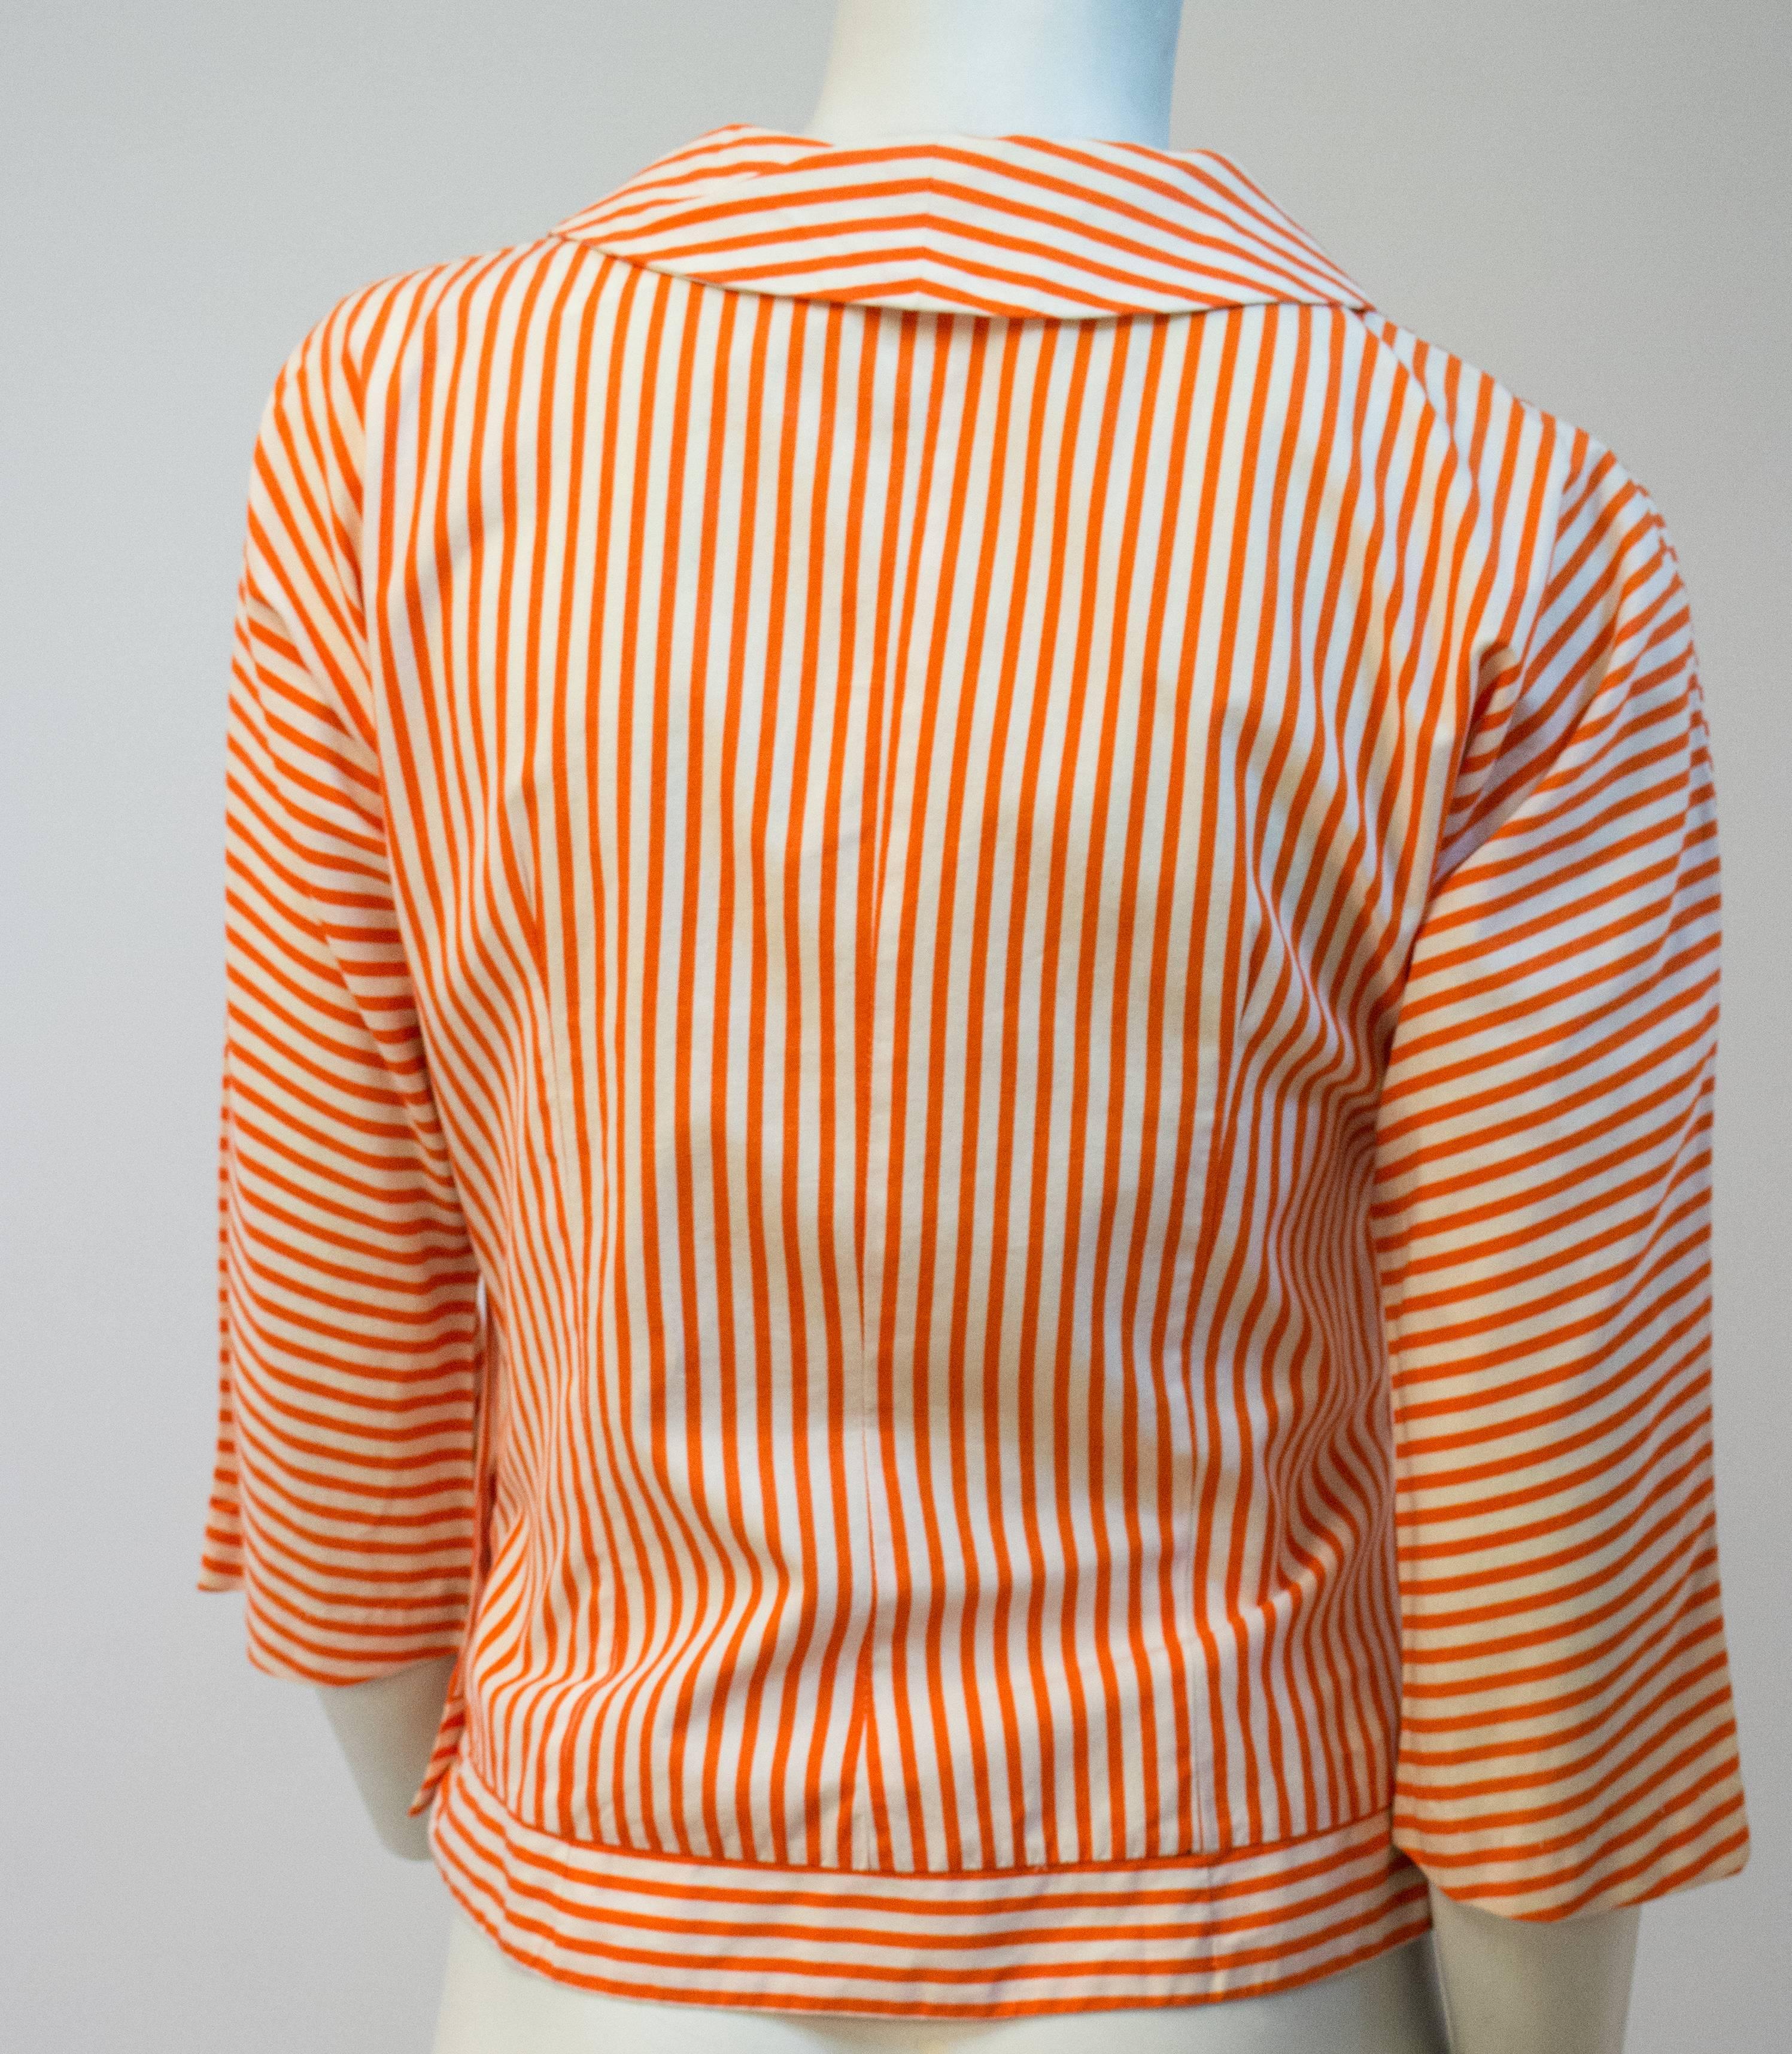 60s Orange and White Striped Sailor Top. Side button closure. Unlined. Dolman sleeves.